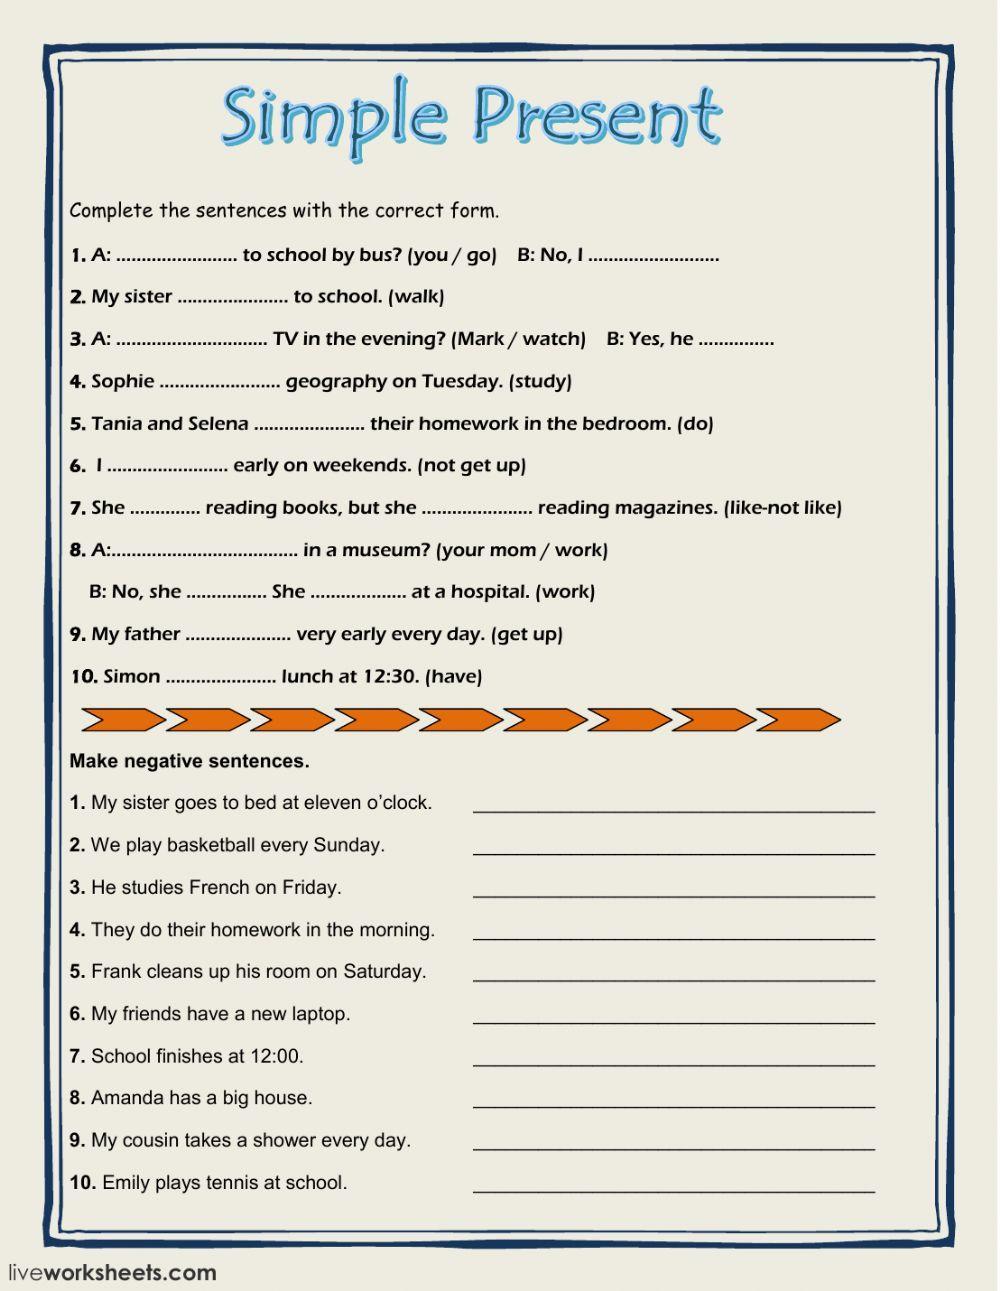 simple-present-activity-live-worksheets